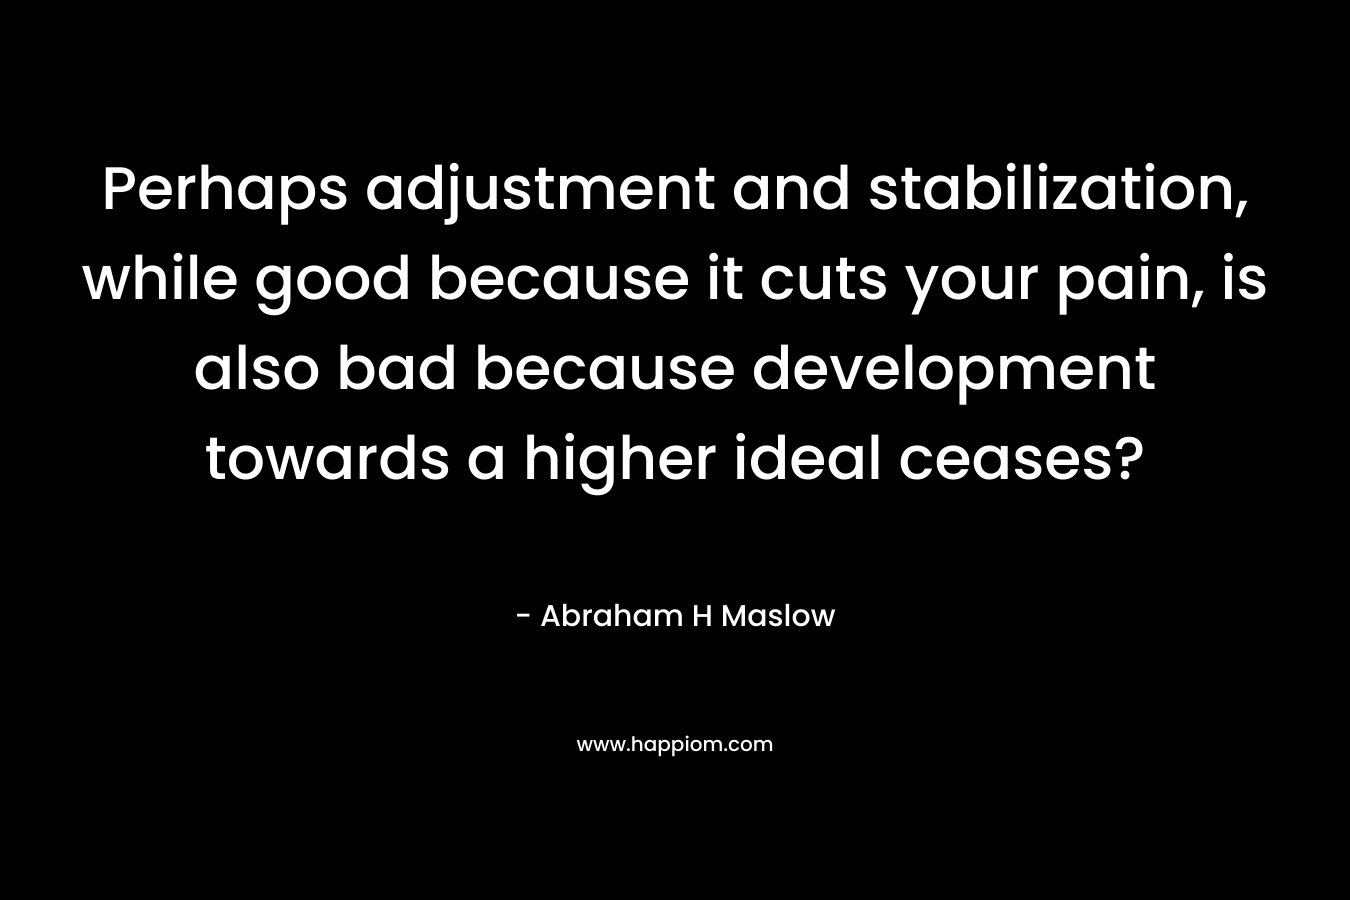 Perhaps adjustment and stabilization, while good because it cuts your pain, is also bad because development towards a higher ideal ceases?